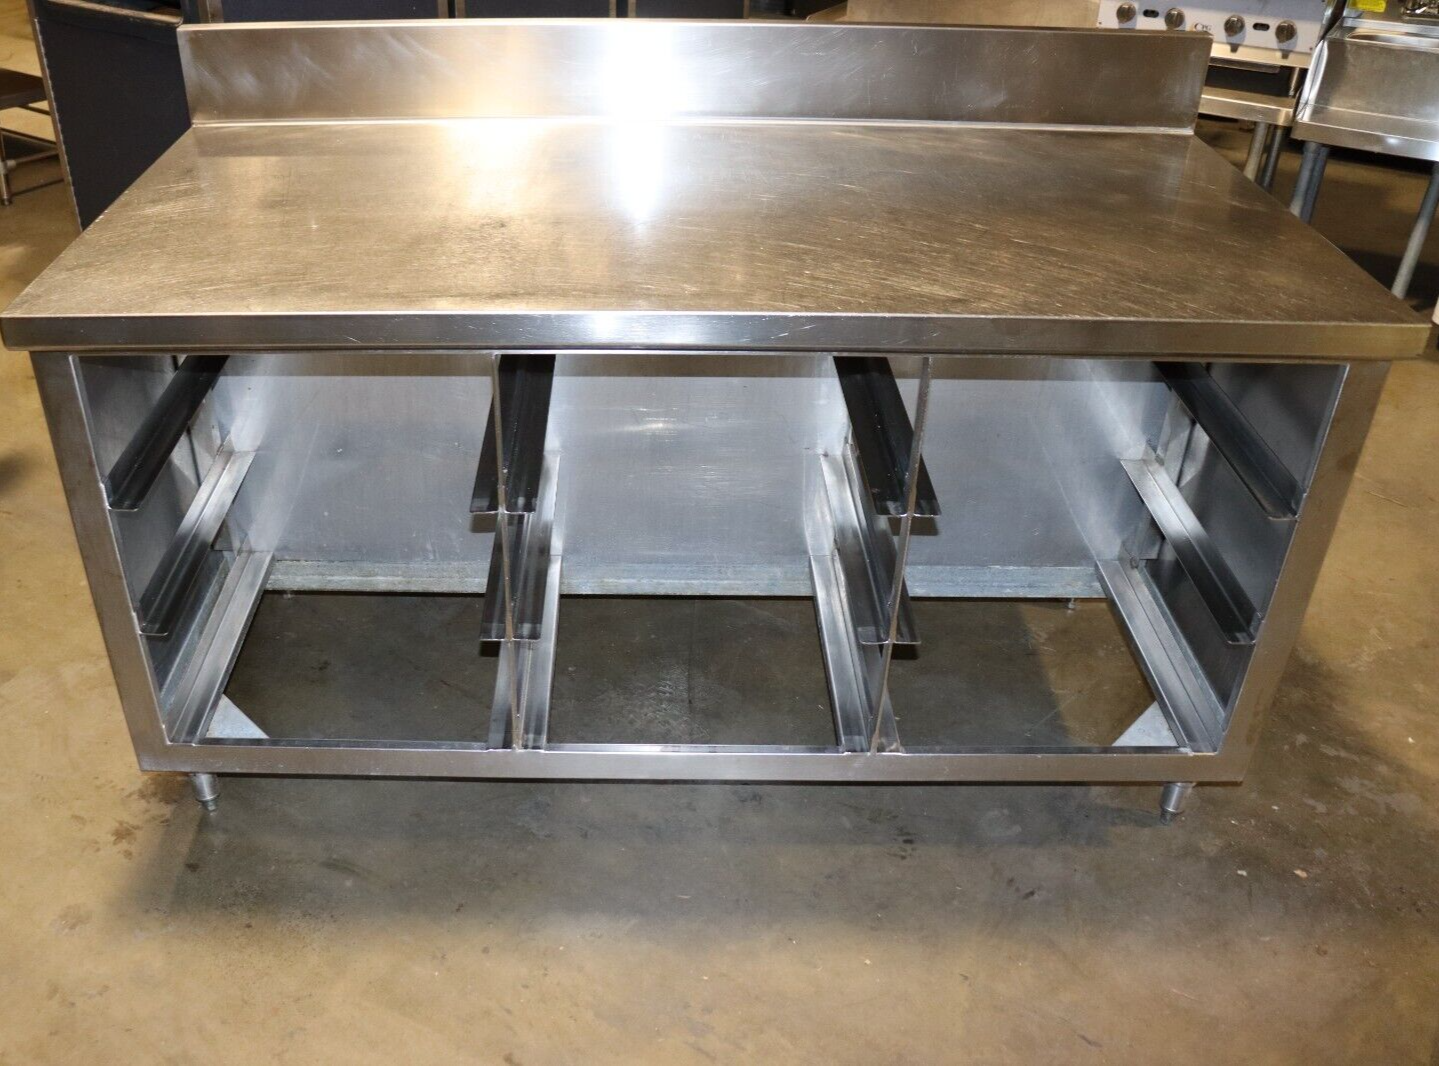 STAINLESS STEEL Table with PAN STORAGE 66 Inch X32 Inch